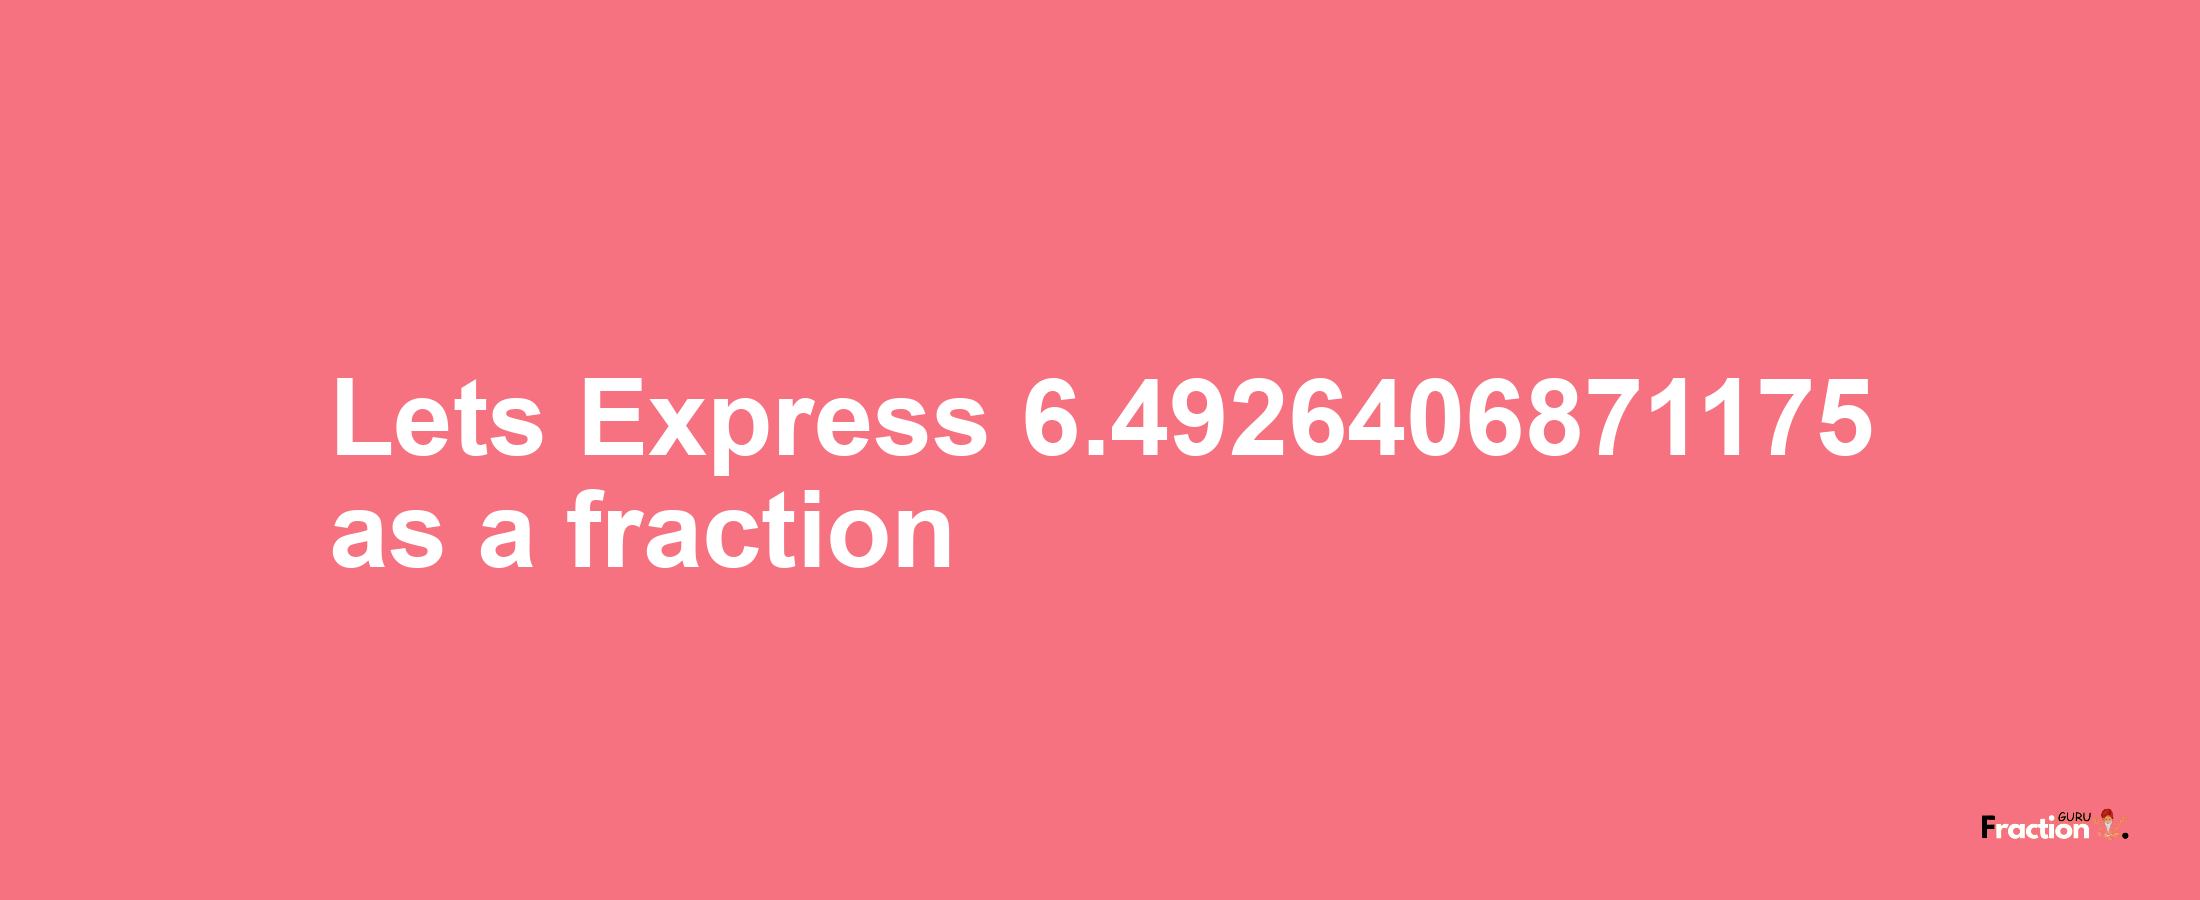 Lets Express 6.4926406871175 as afraction